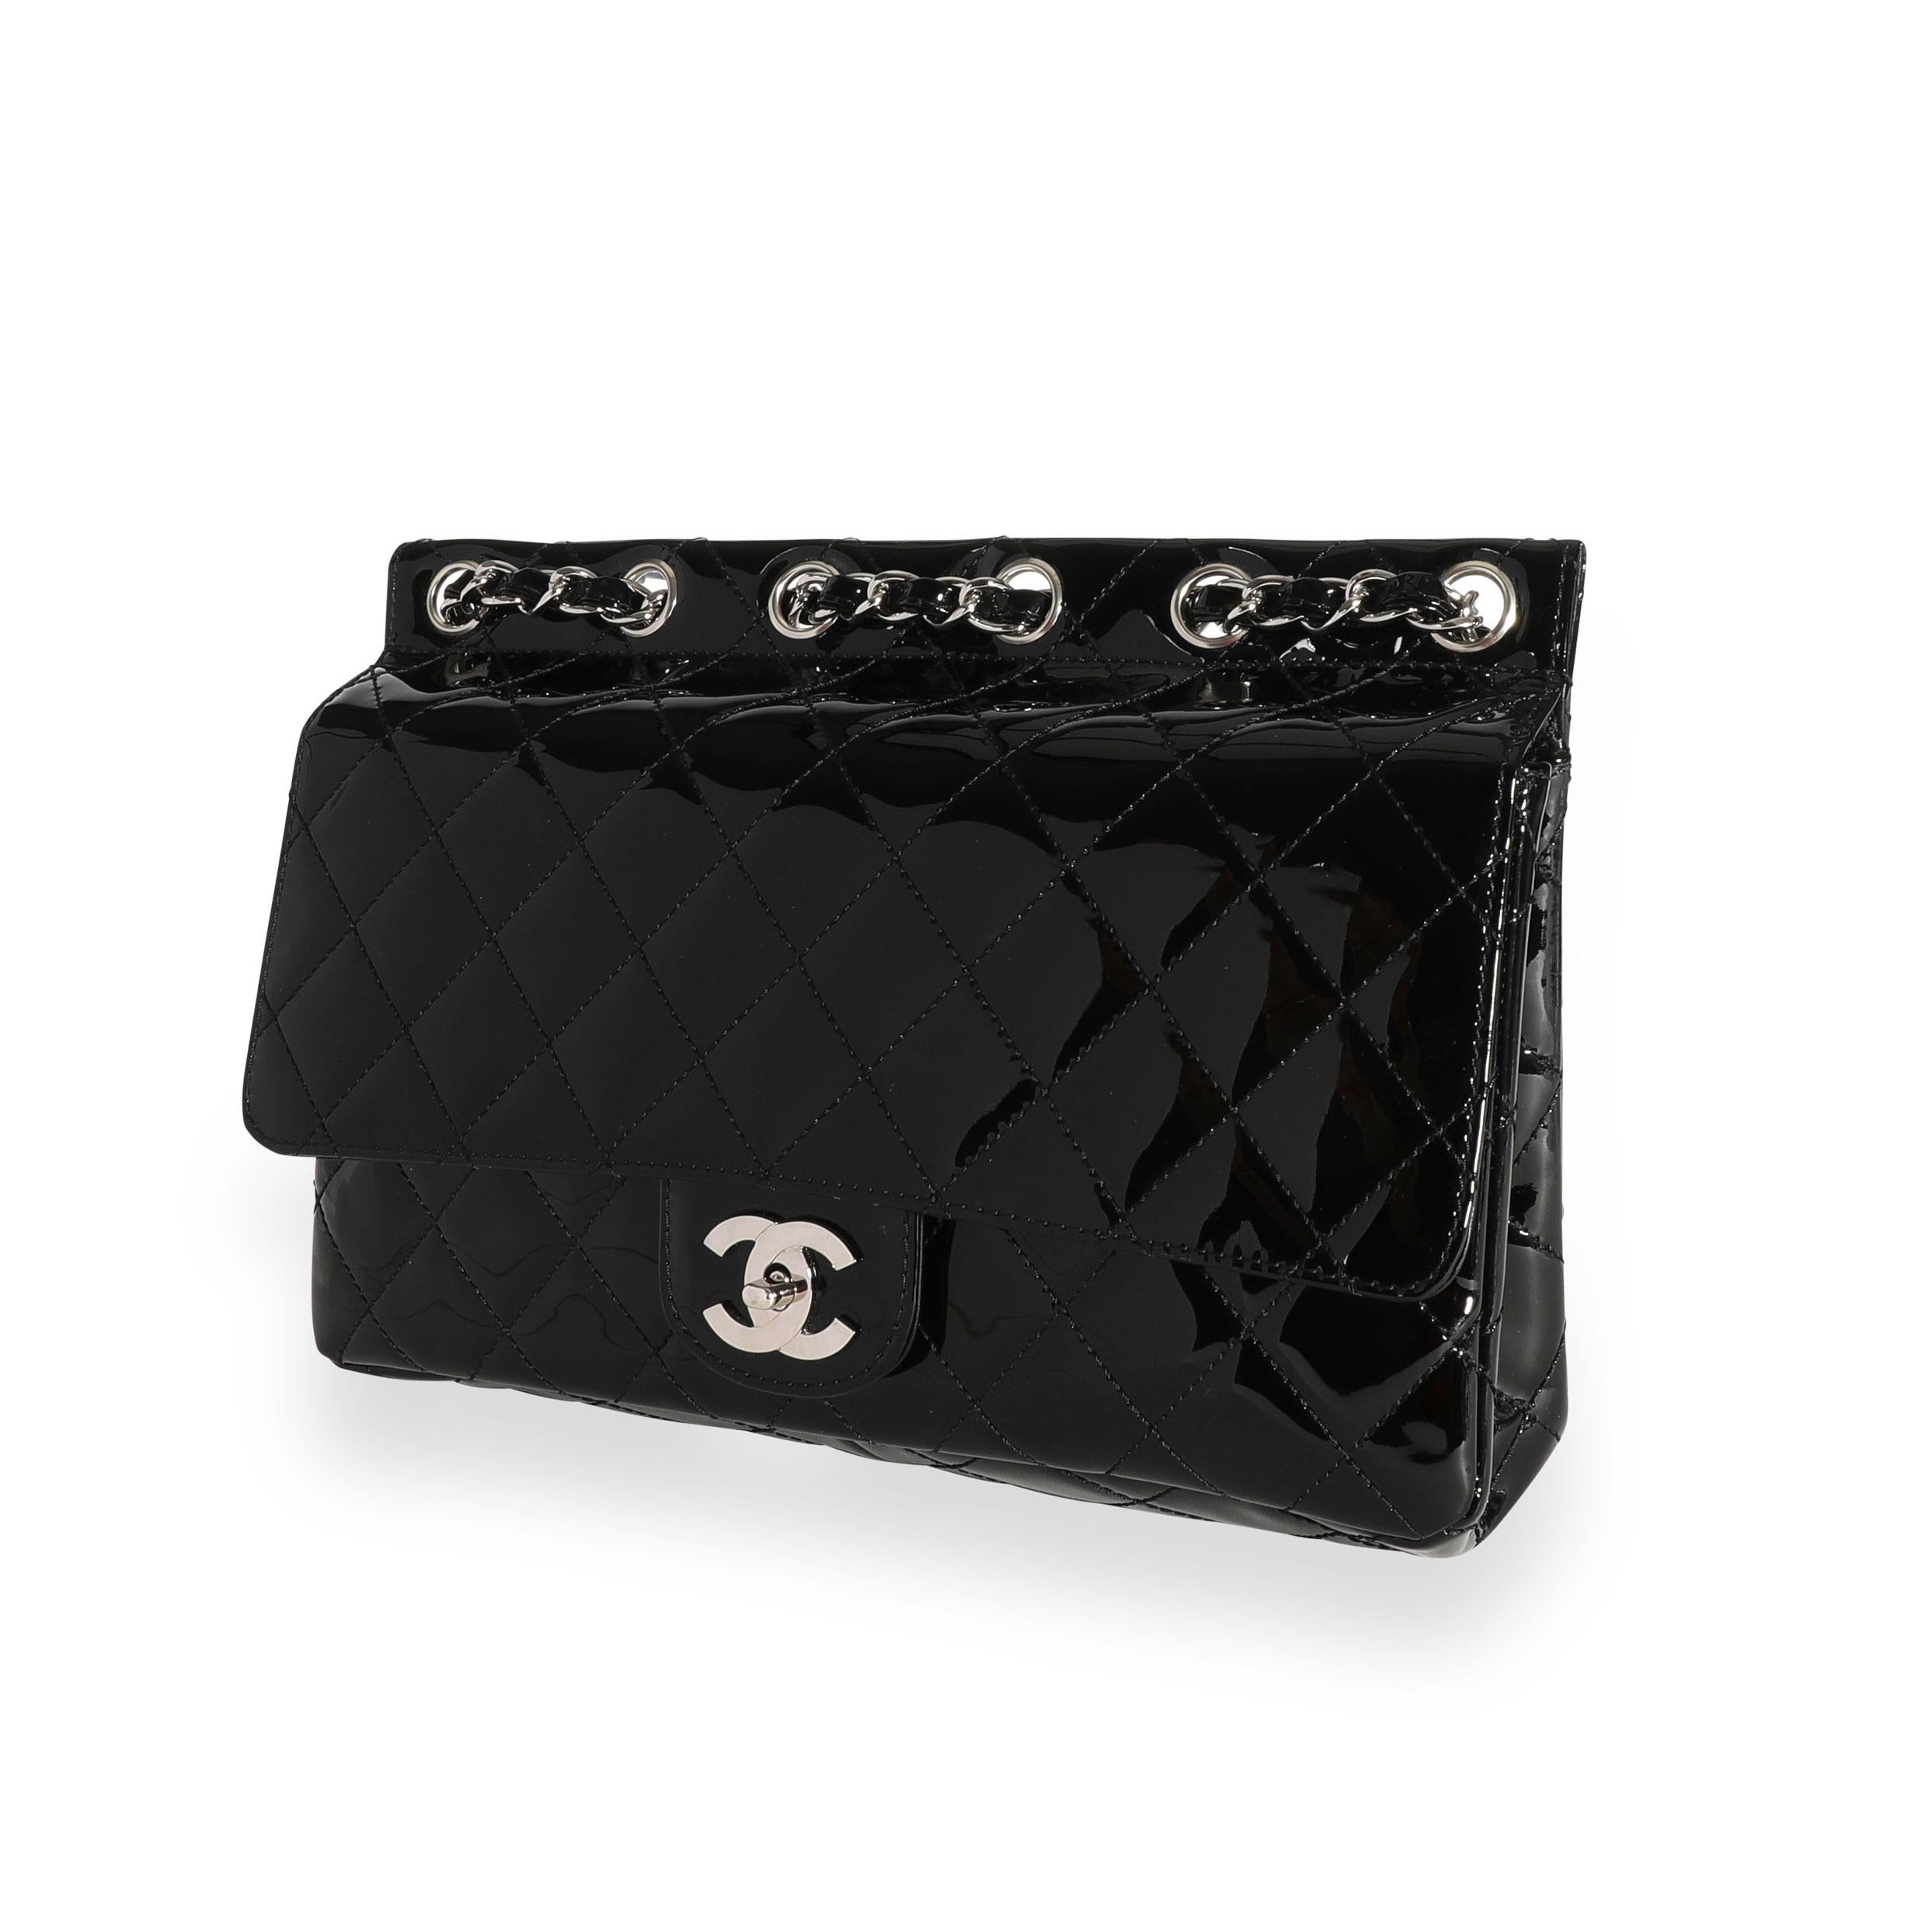 Chanel Black Quilted Patent Leather Supermodel Flap Bag 4